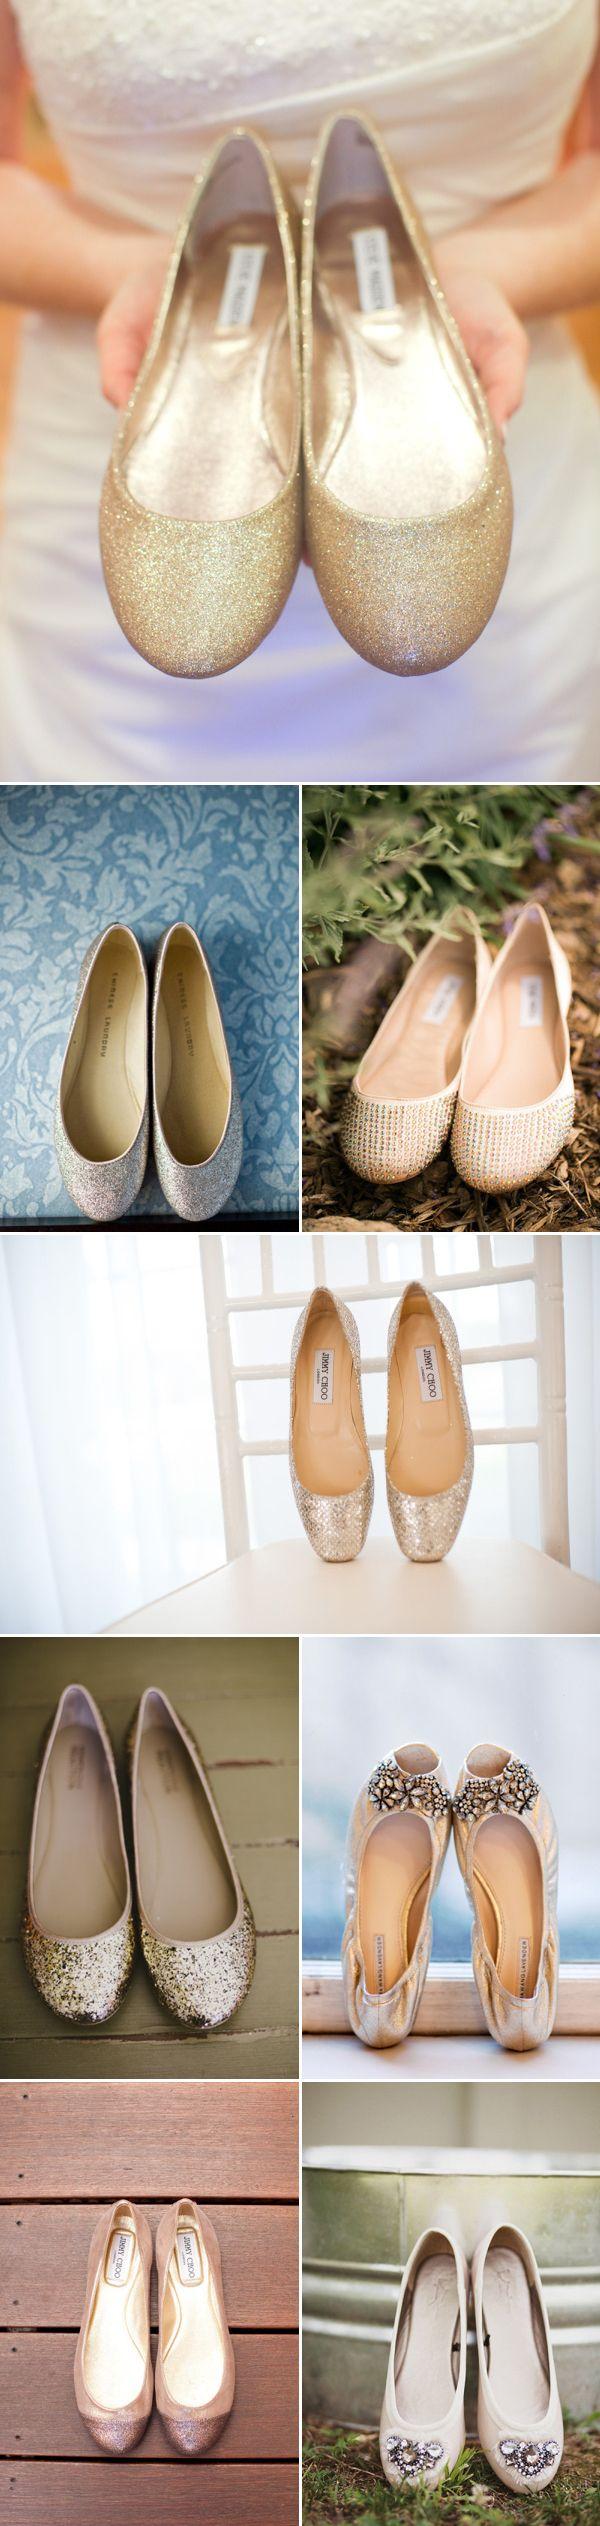 Wedding - Comfort Without Sacrificing Style! 27 Pairs Of Gorgeous Bridal Flats